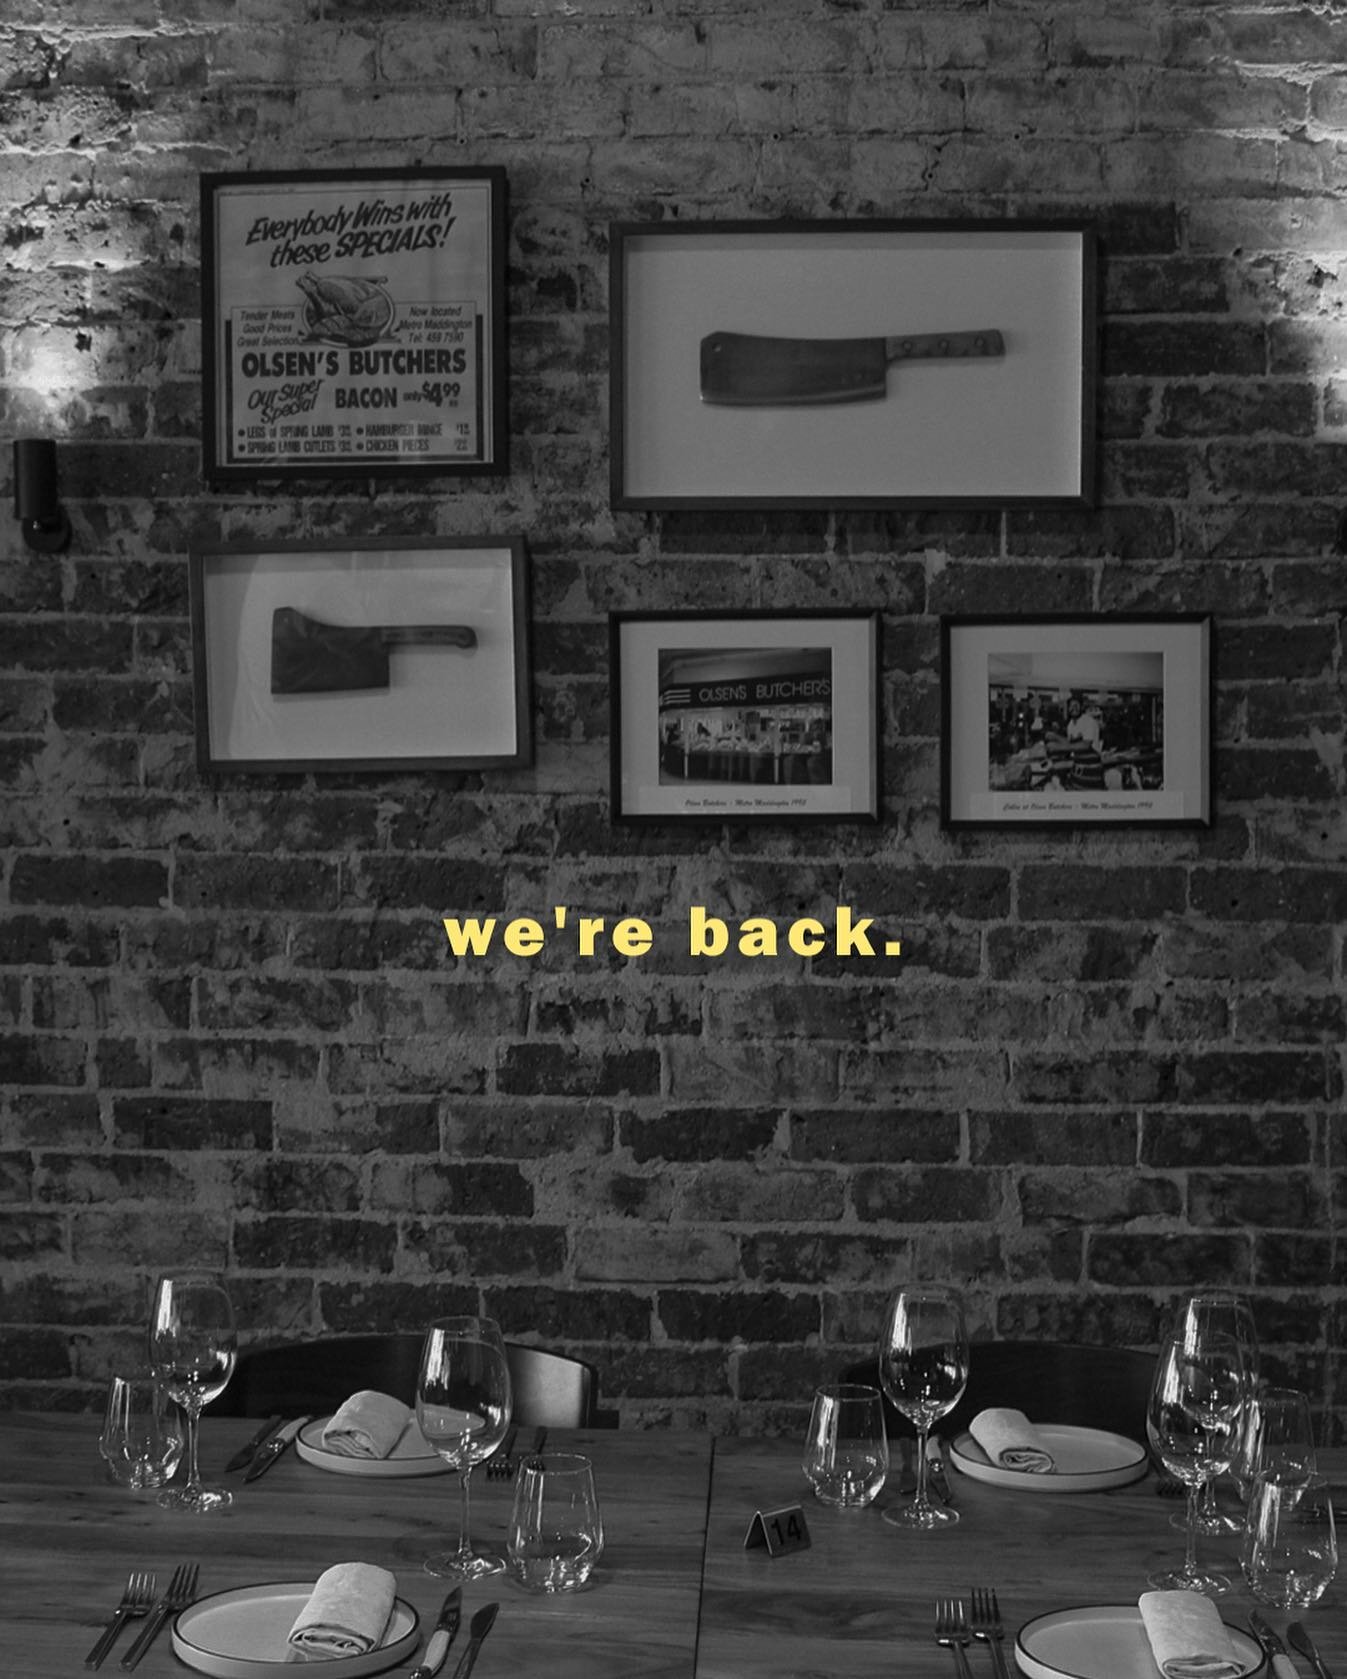 WE&rsquo;RE BACK.
 
we&rsquo;ll be back serving you from 3pm! 

drop in and say hi - stay for a minute, stay for a while..